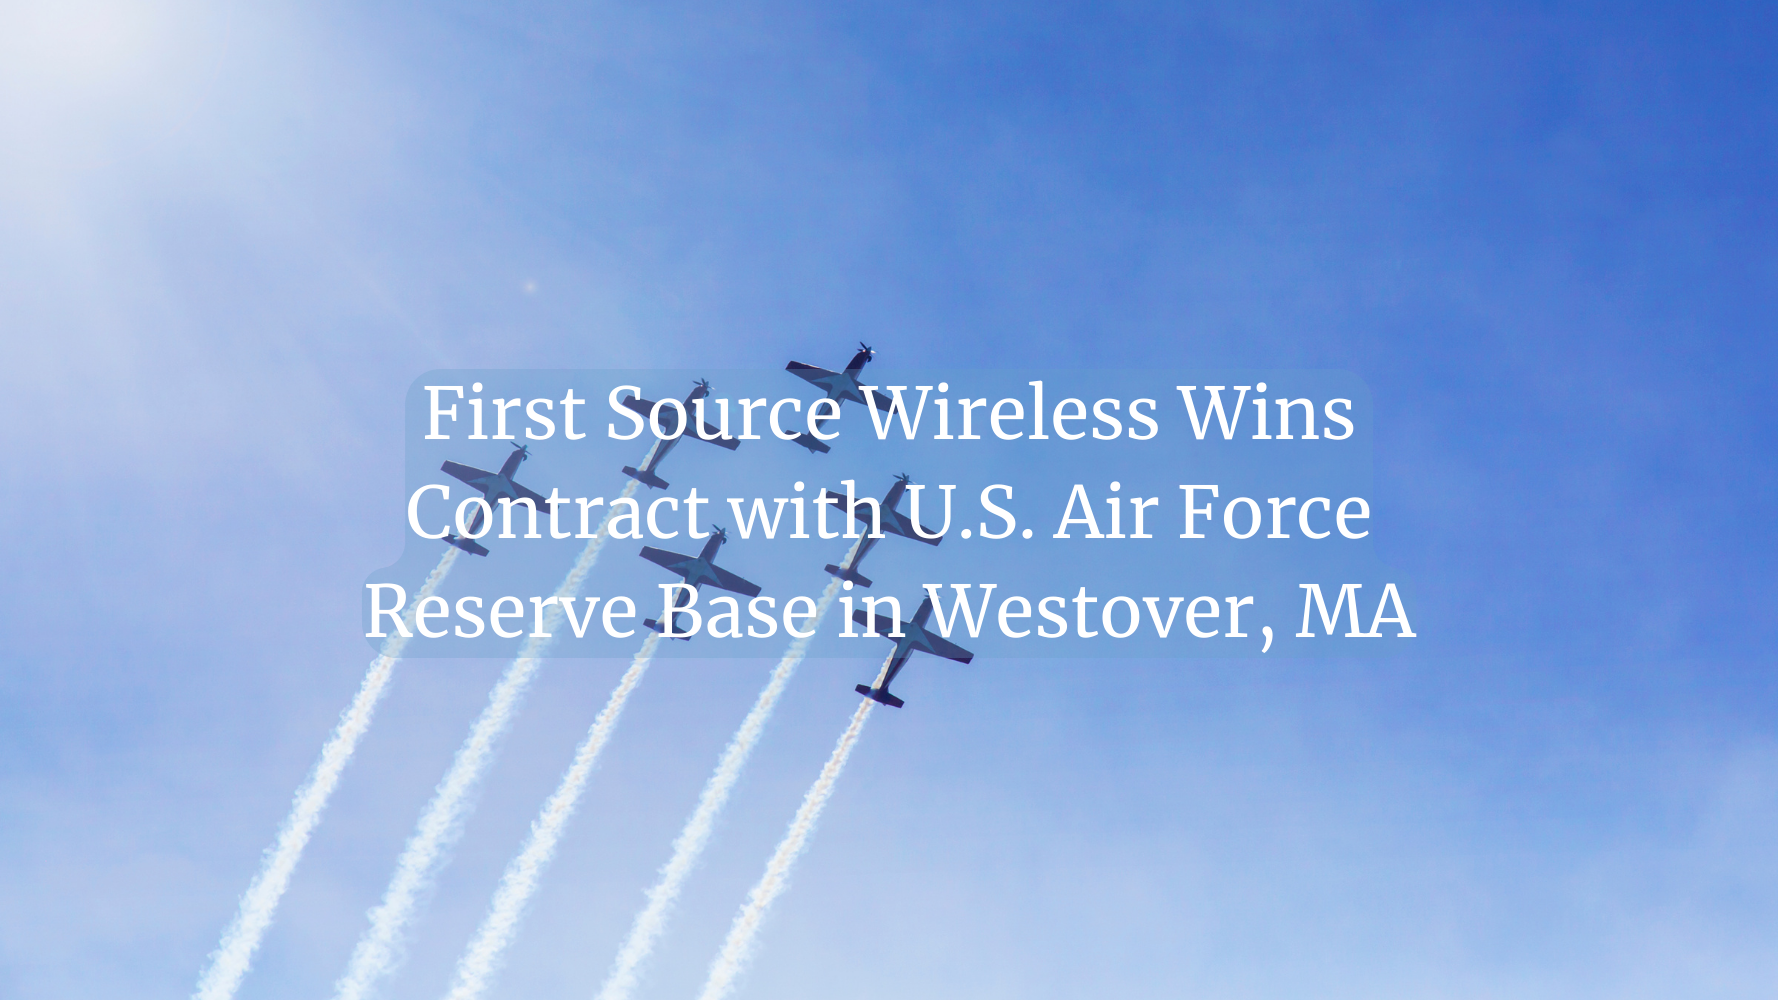 First Source Wireless Wins Contract with U.S. Air Force Reserve Base in Westover, MA